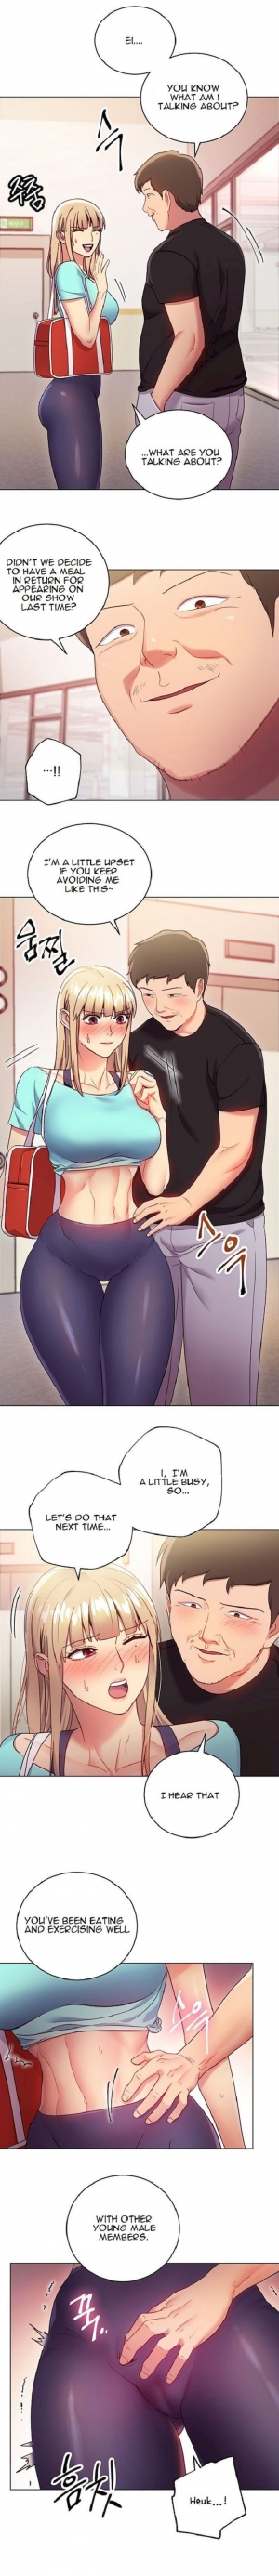 [Neck Pilllow] Stepmother Friends Ch.27/? [English] [Hentai Universe] - Page 151